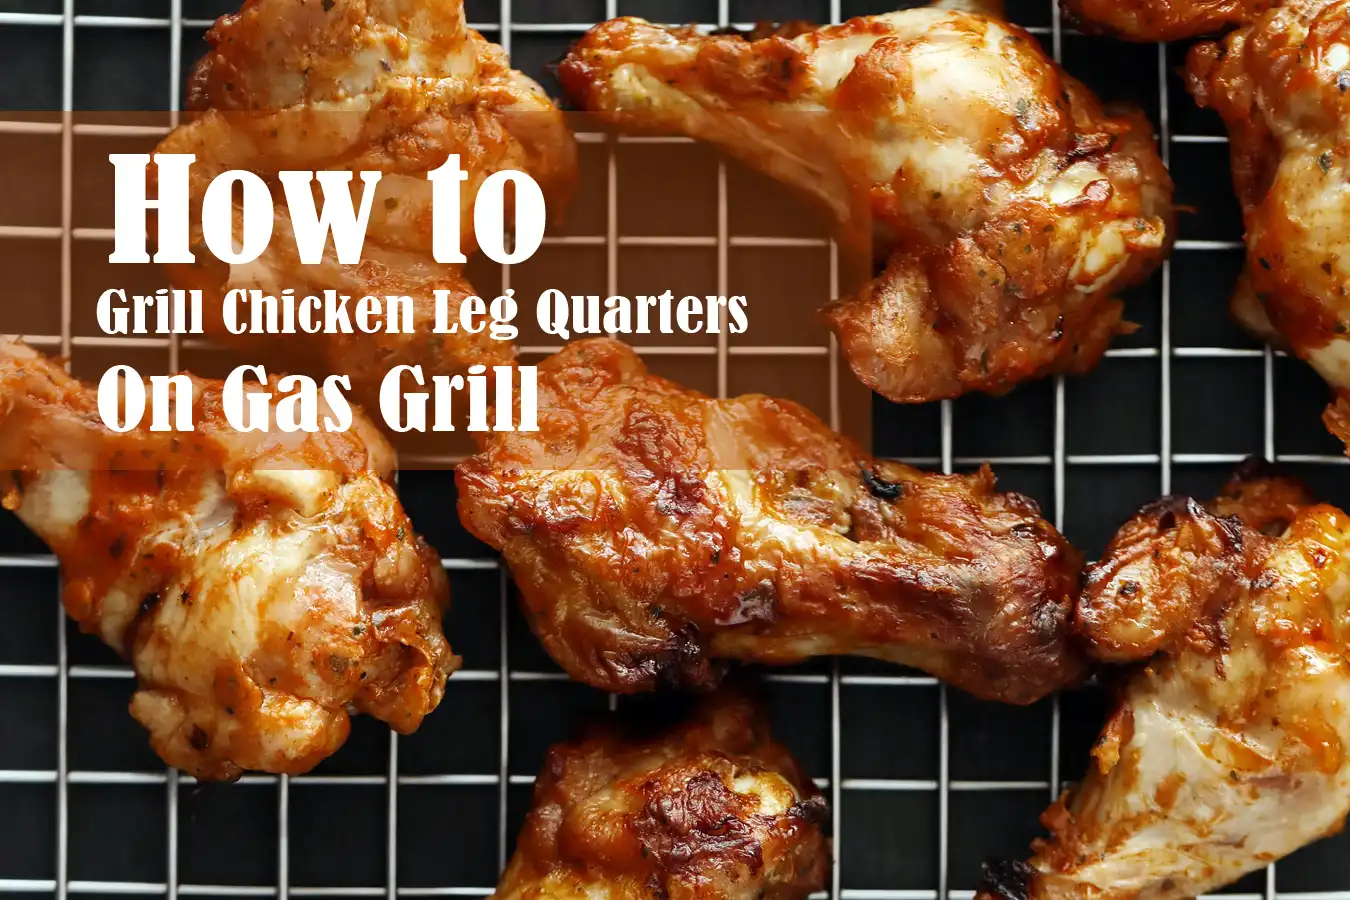 Grill Chicken Leg Quarters on Gas Grill